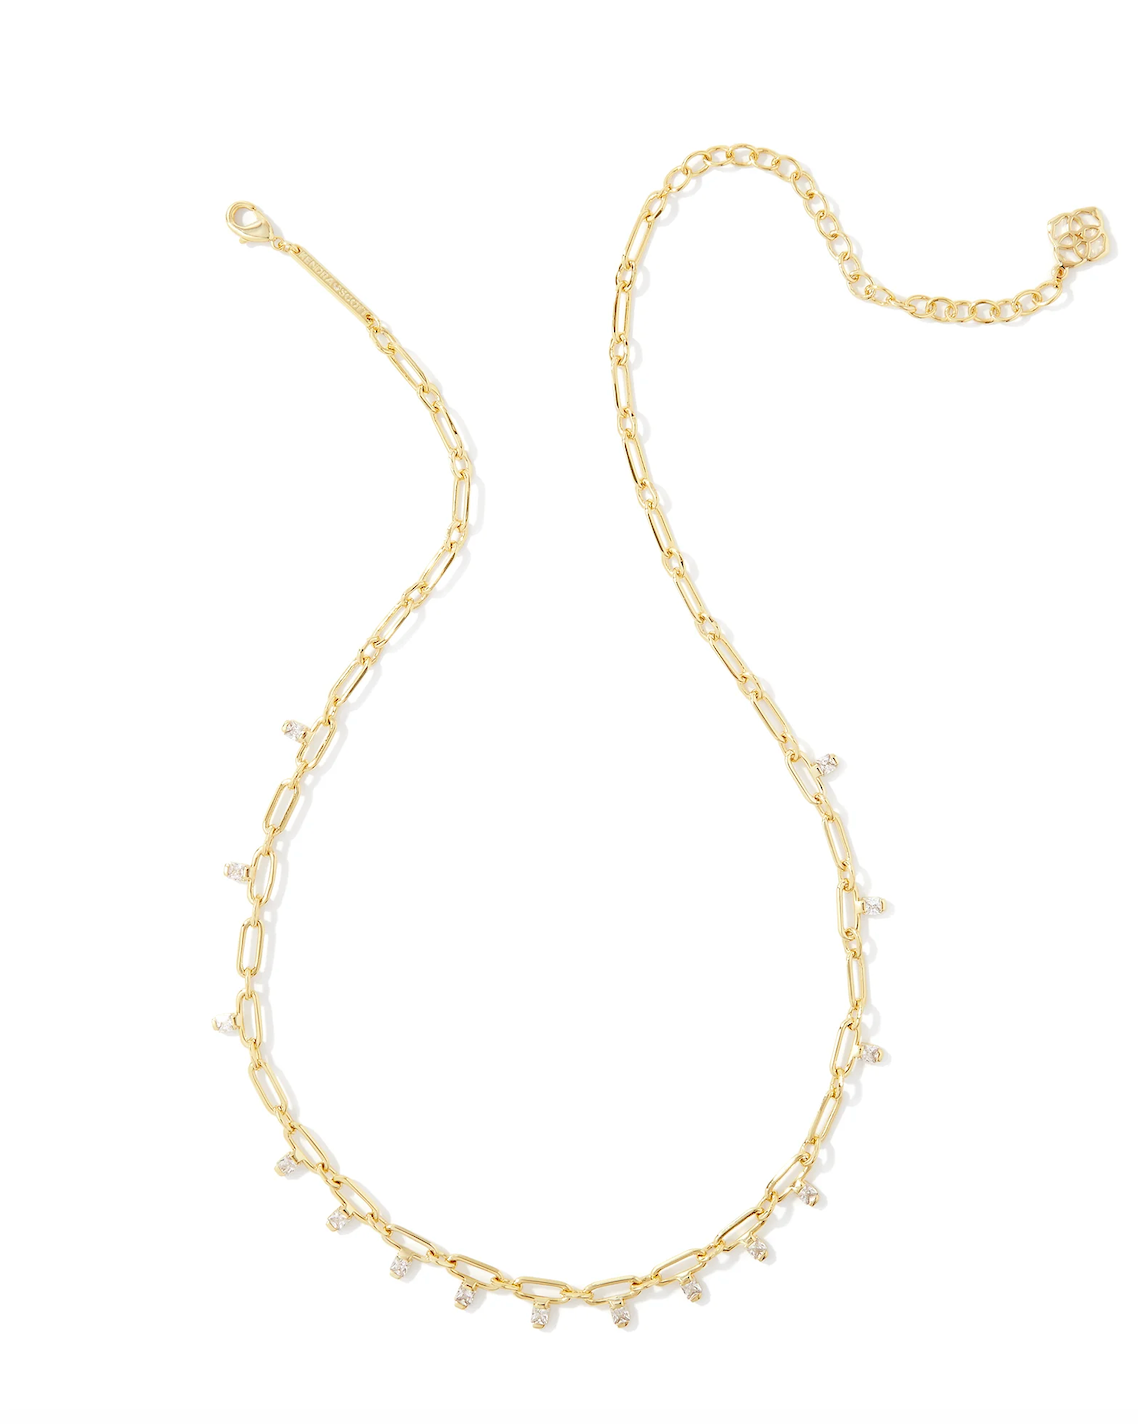 KENDRA SCOTT LINDY GOLD CRYSTAL CHAIN NECKLACE IN WHITE CRYSTAL